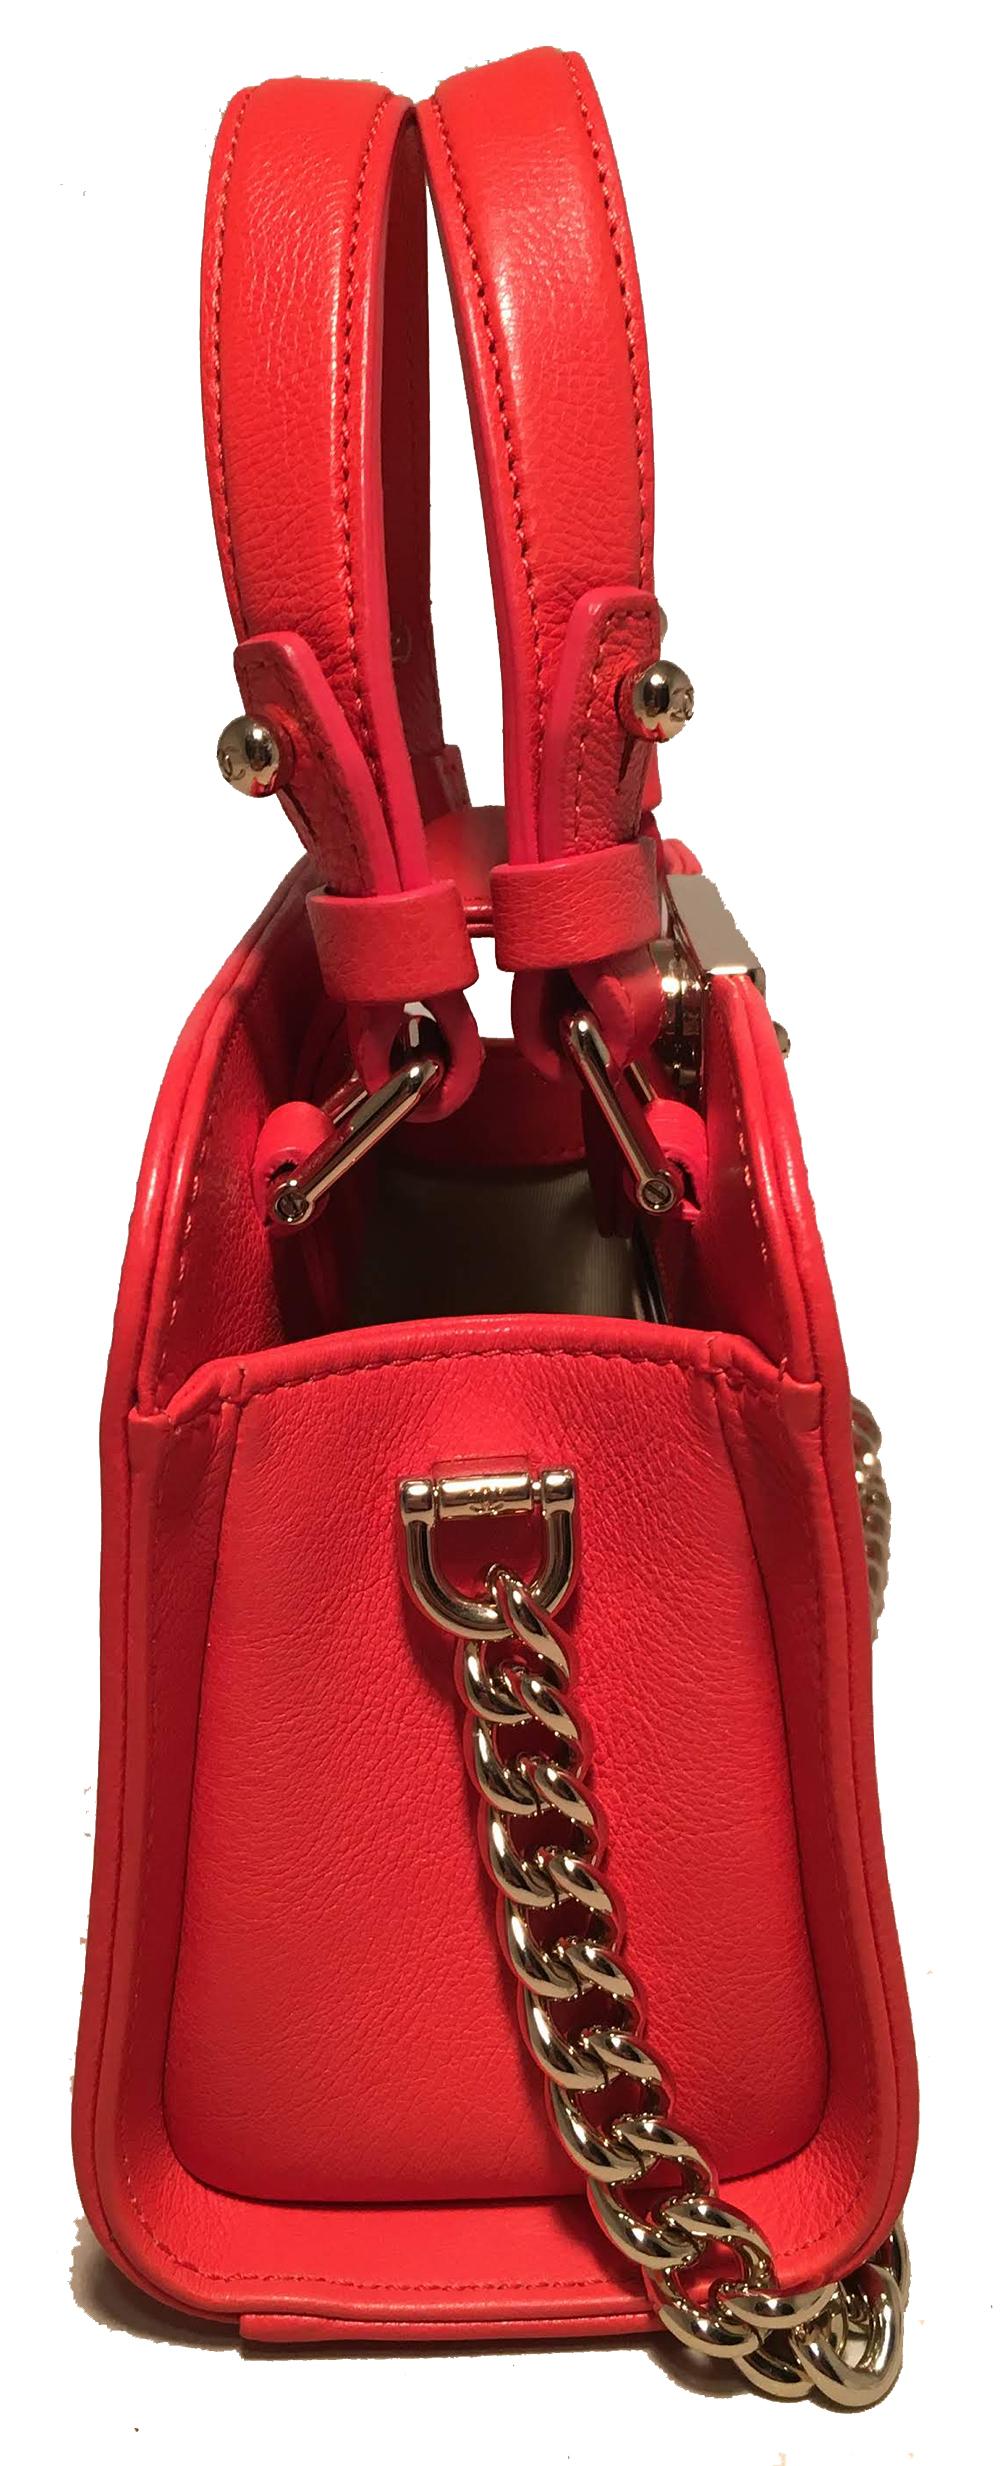 Chanel Red Quilted Leather Mini Shopping Tote Bag 2